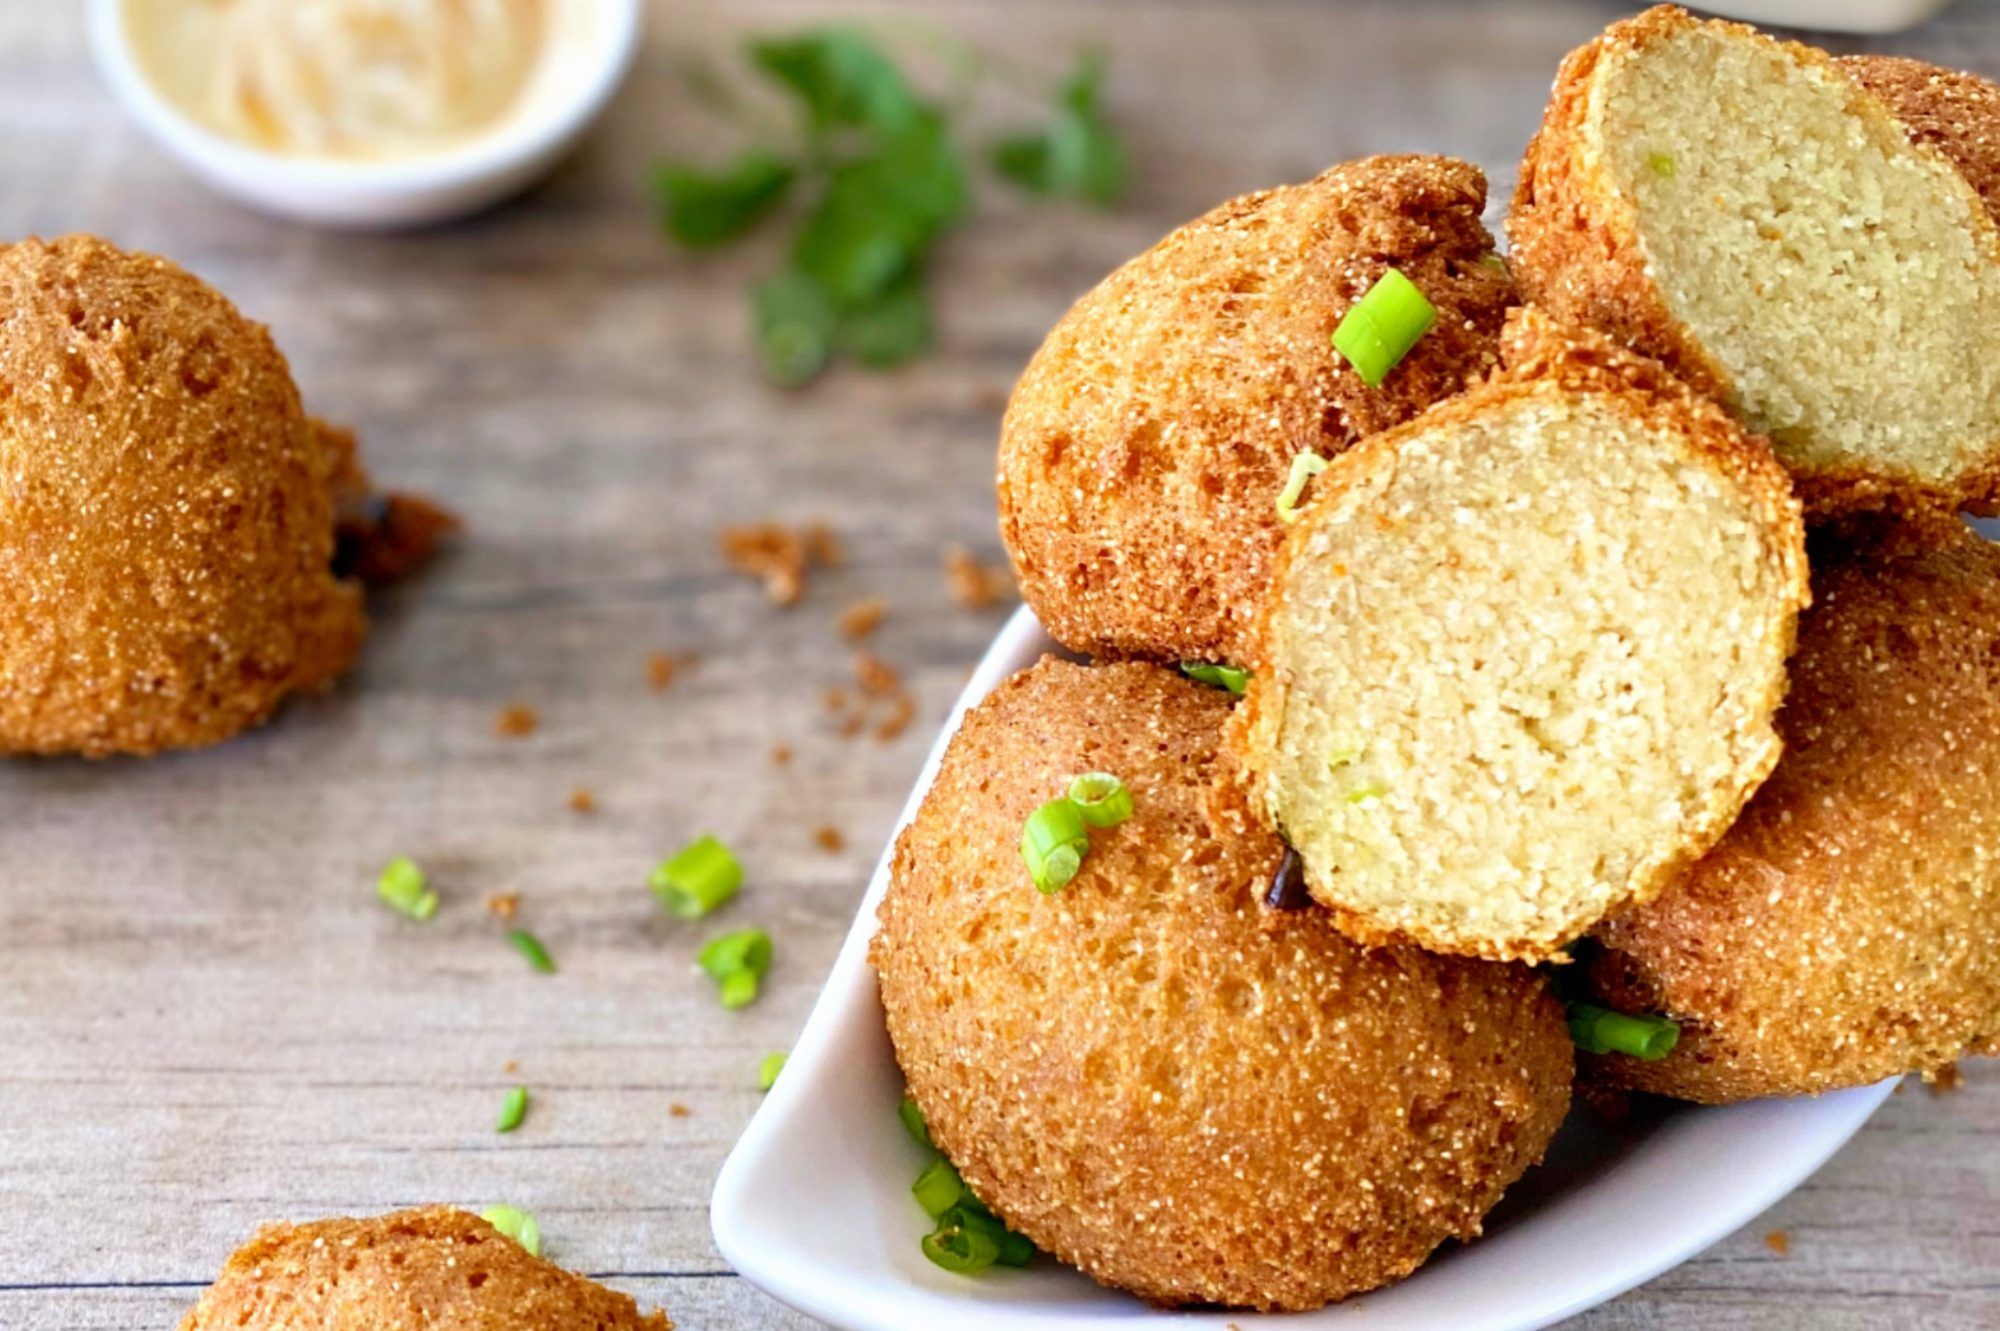 an image of Maize Meal Hush Puppies